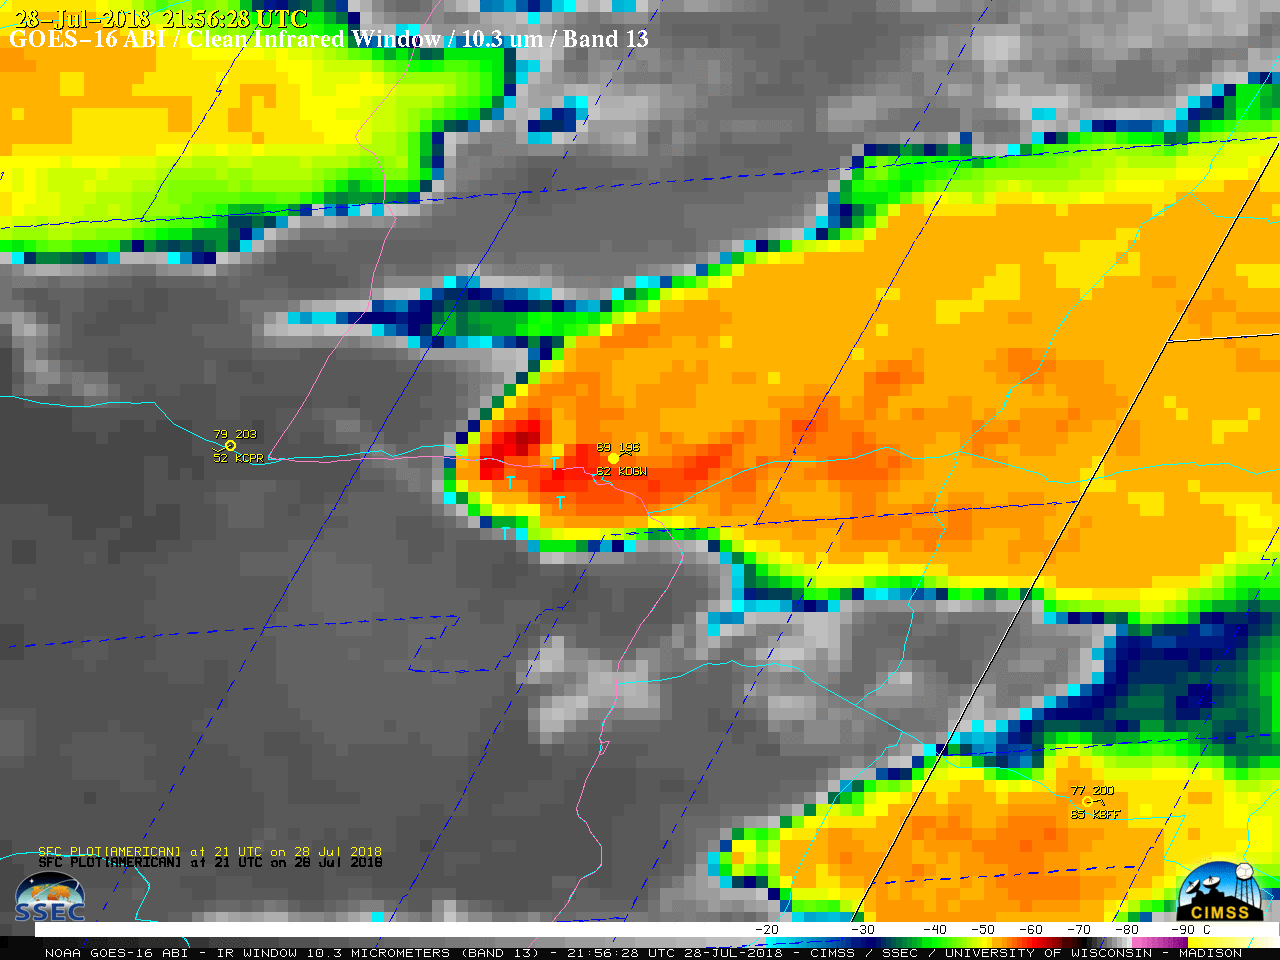 GOES-16 "Clean" Infrared Window (10.3 µm) images, with hourly plots of surface observations (yellow) along with SPC storm reports (cyan) Interstate Highways (violet) and State Highways (cyan) [click to play MP4 animation]